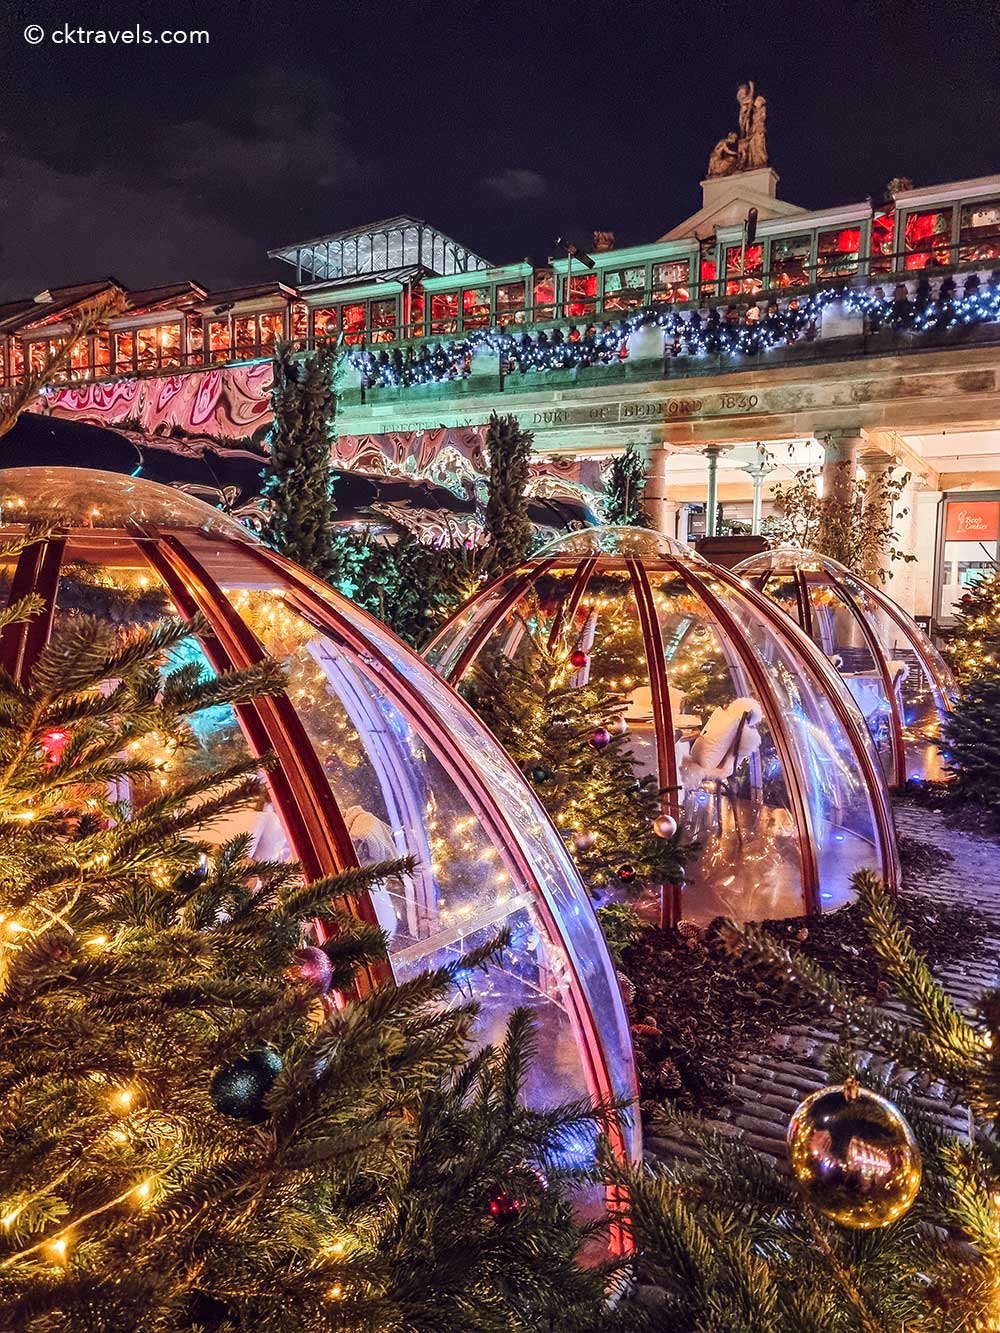 Covent Garden Christmas - Instagrammable Places in London - Best Photo Spots